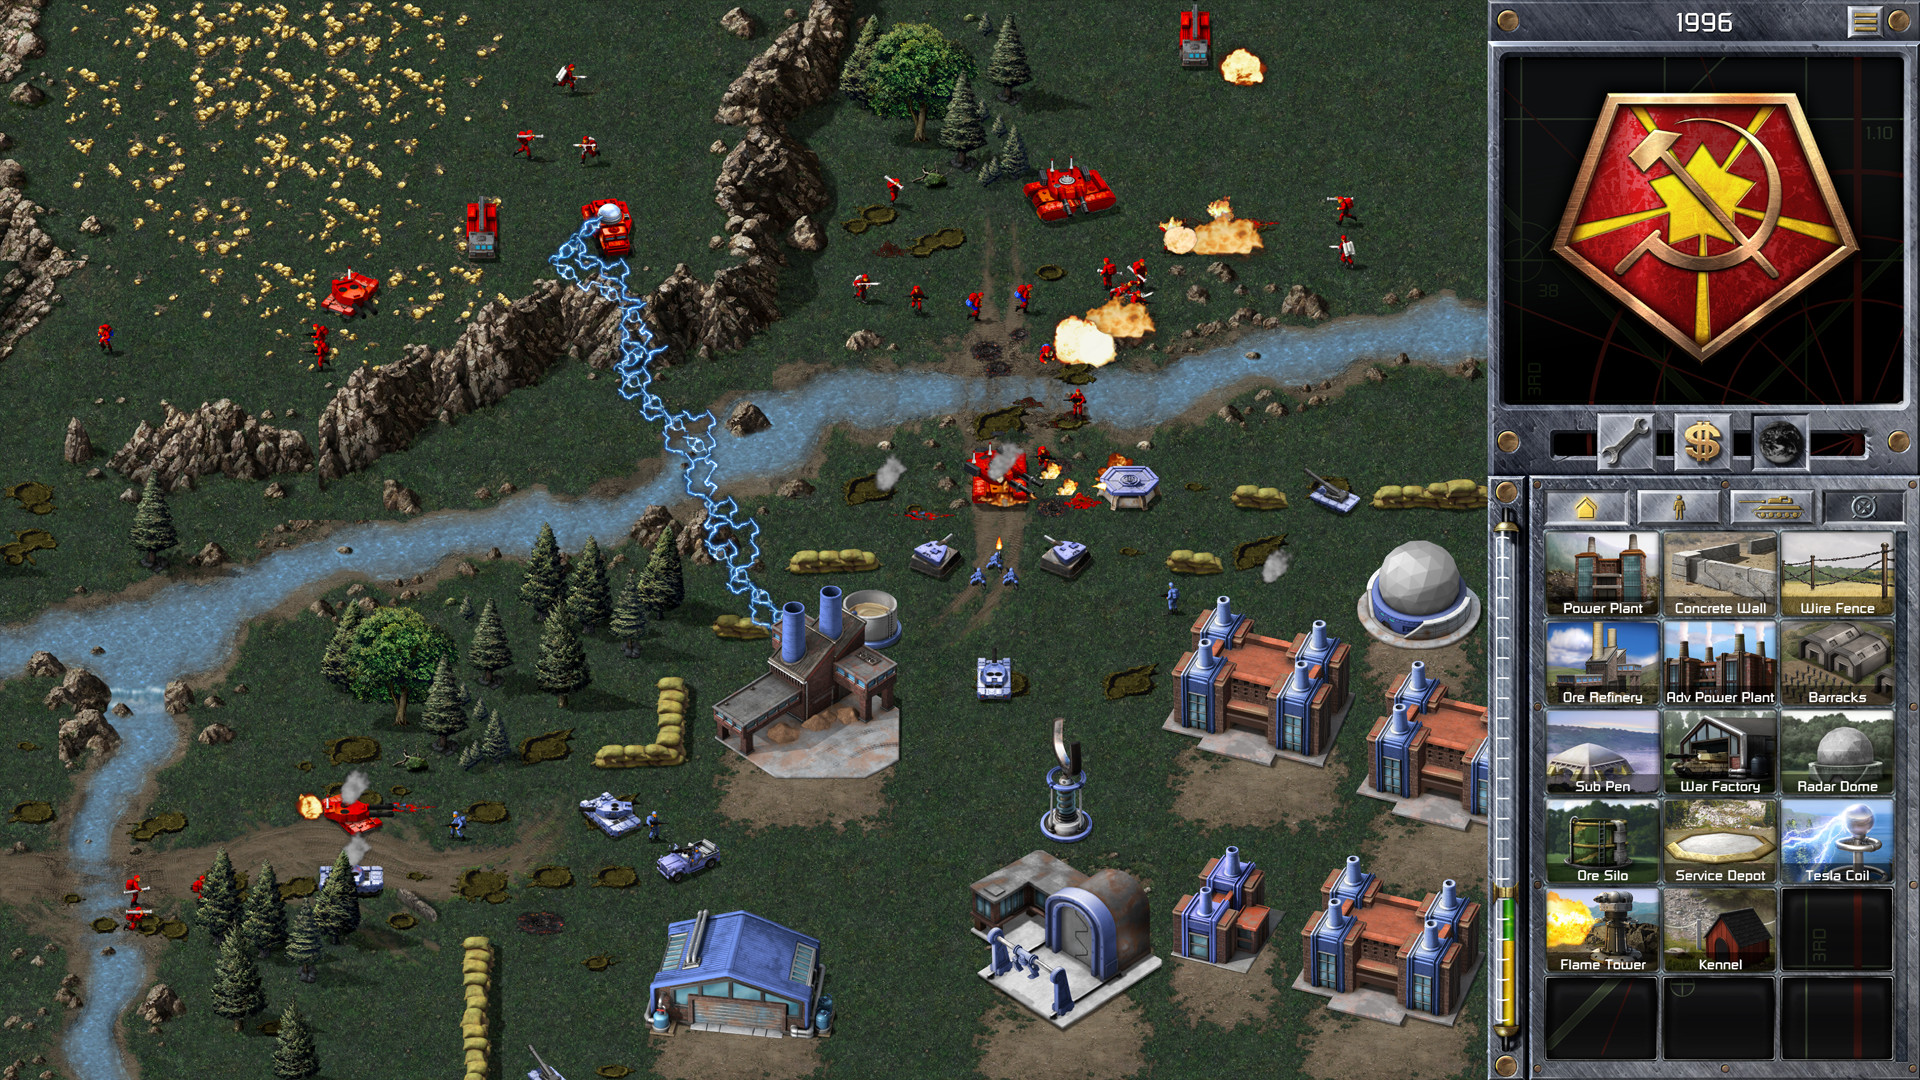 The Commander & Conquer Franchise Was Once a Benchmark for the RTS Genre